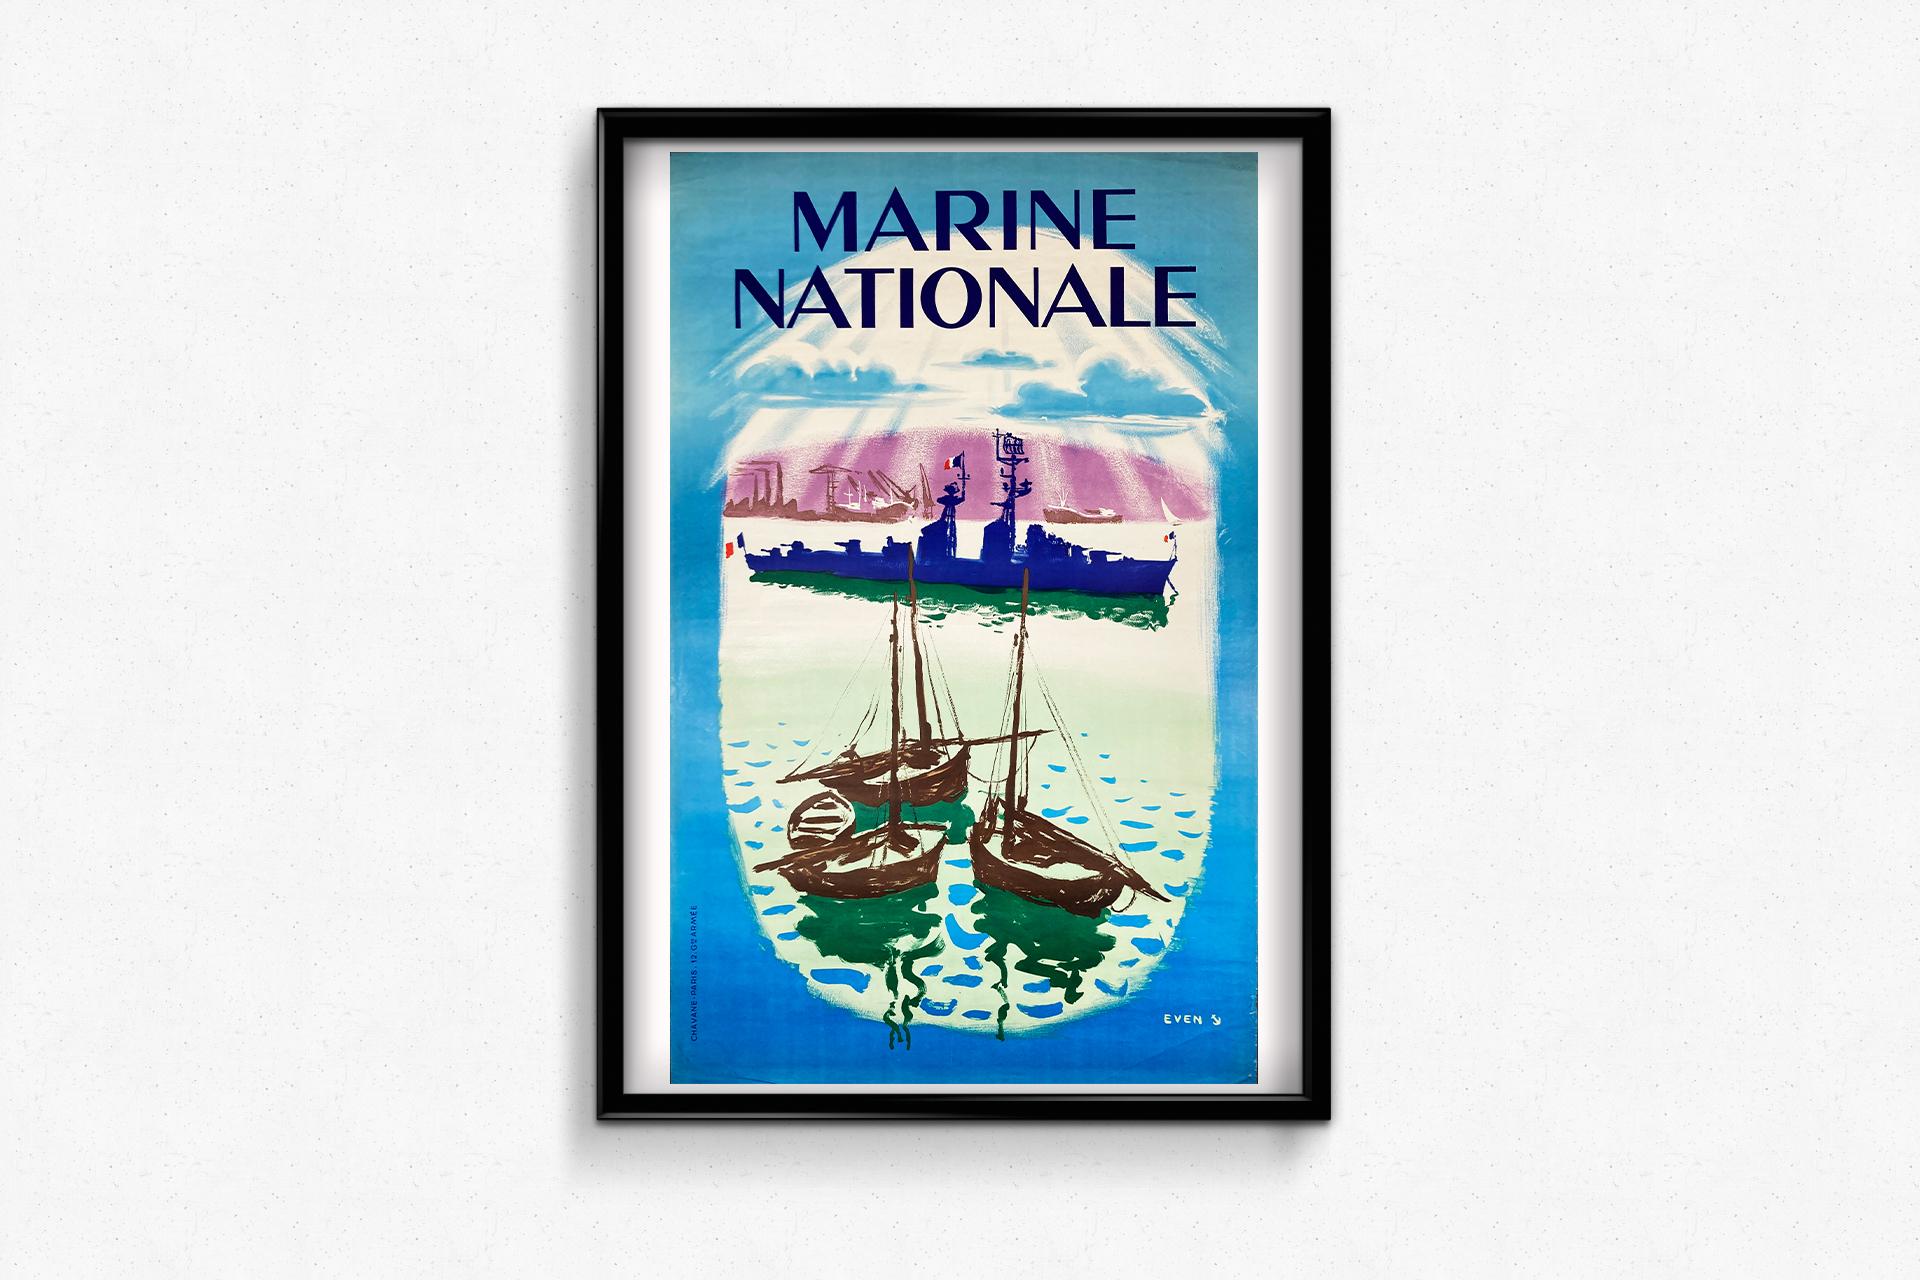 Circa 1950 Original poster by Jean Even - Marine Nationale - National Navy  For Sale 2